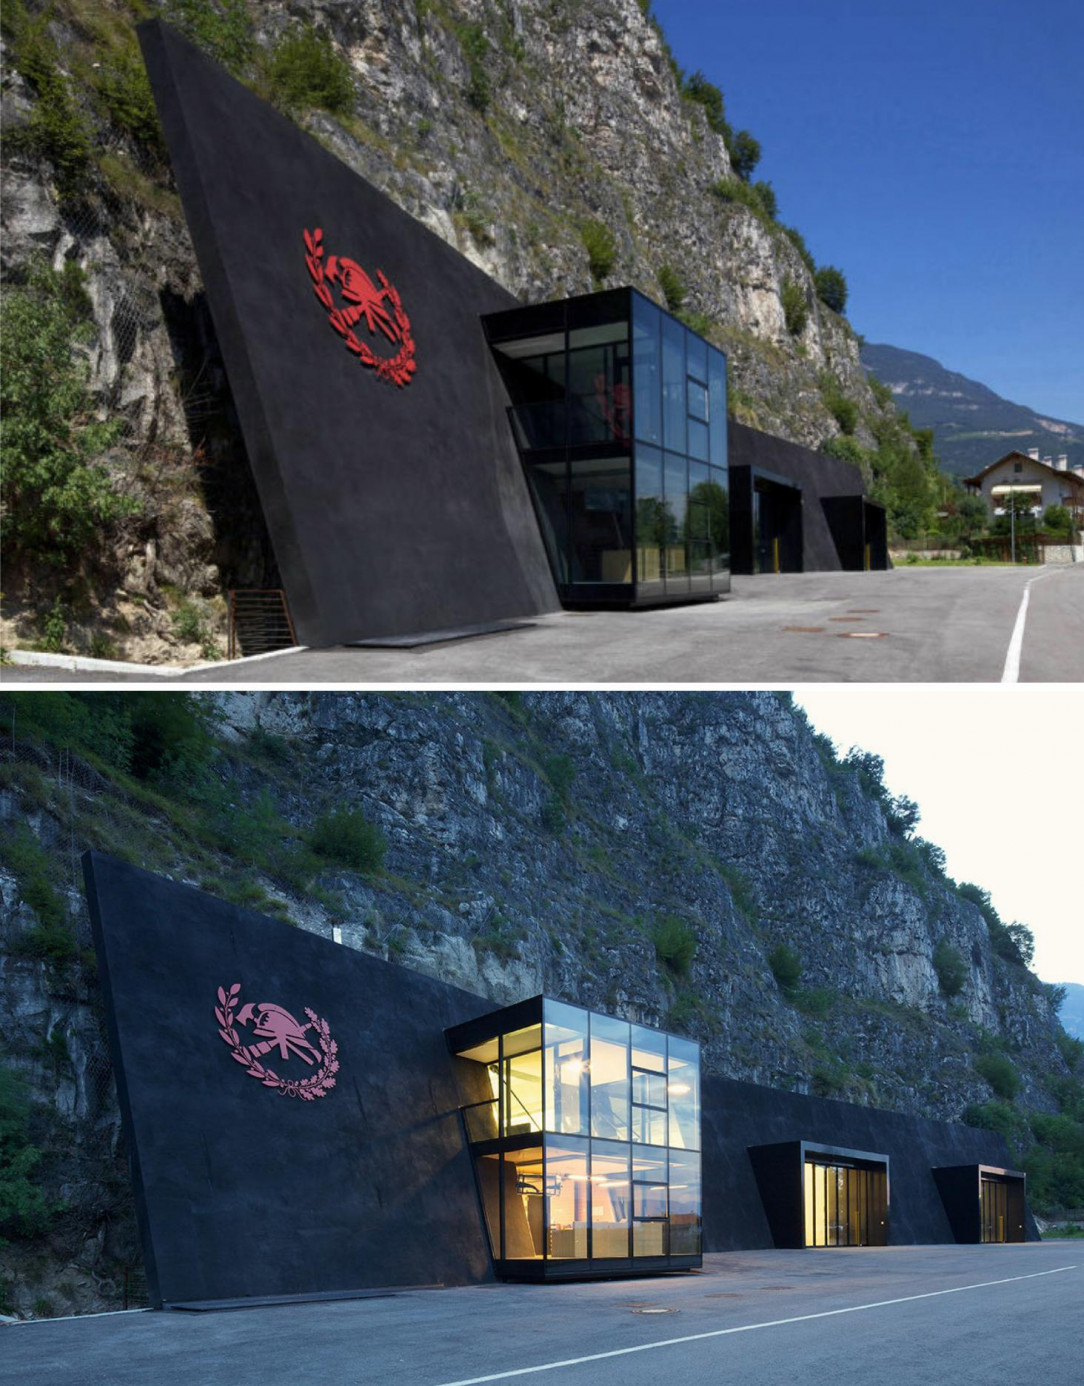 This is what a fire station in Italy looks like